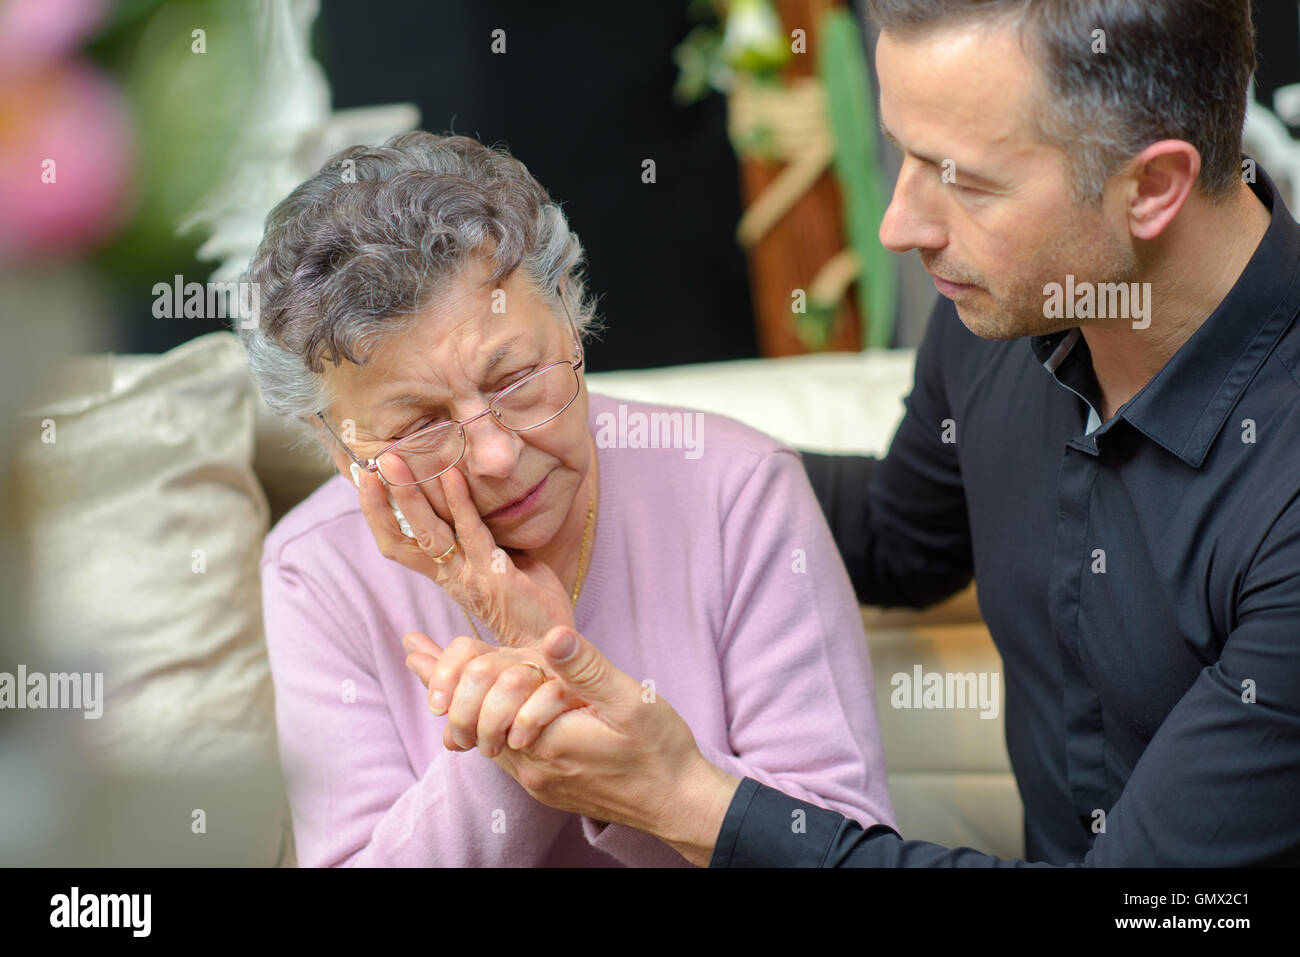 emotional support Stock Photo